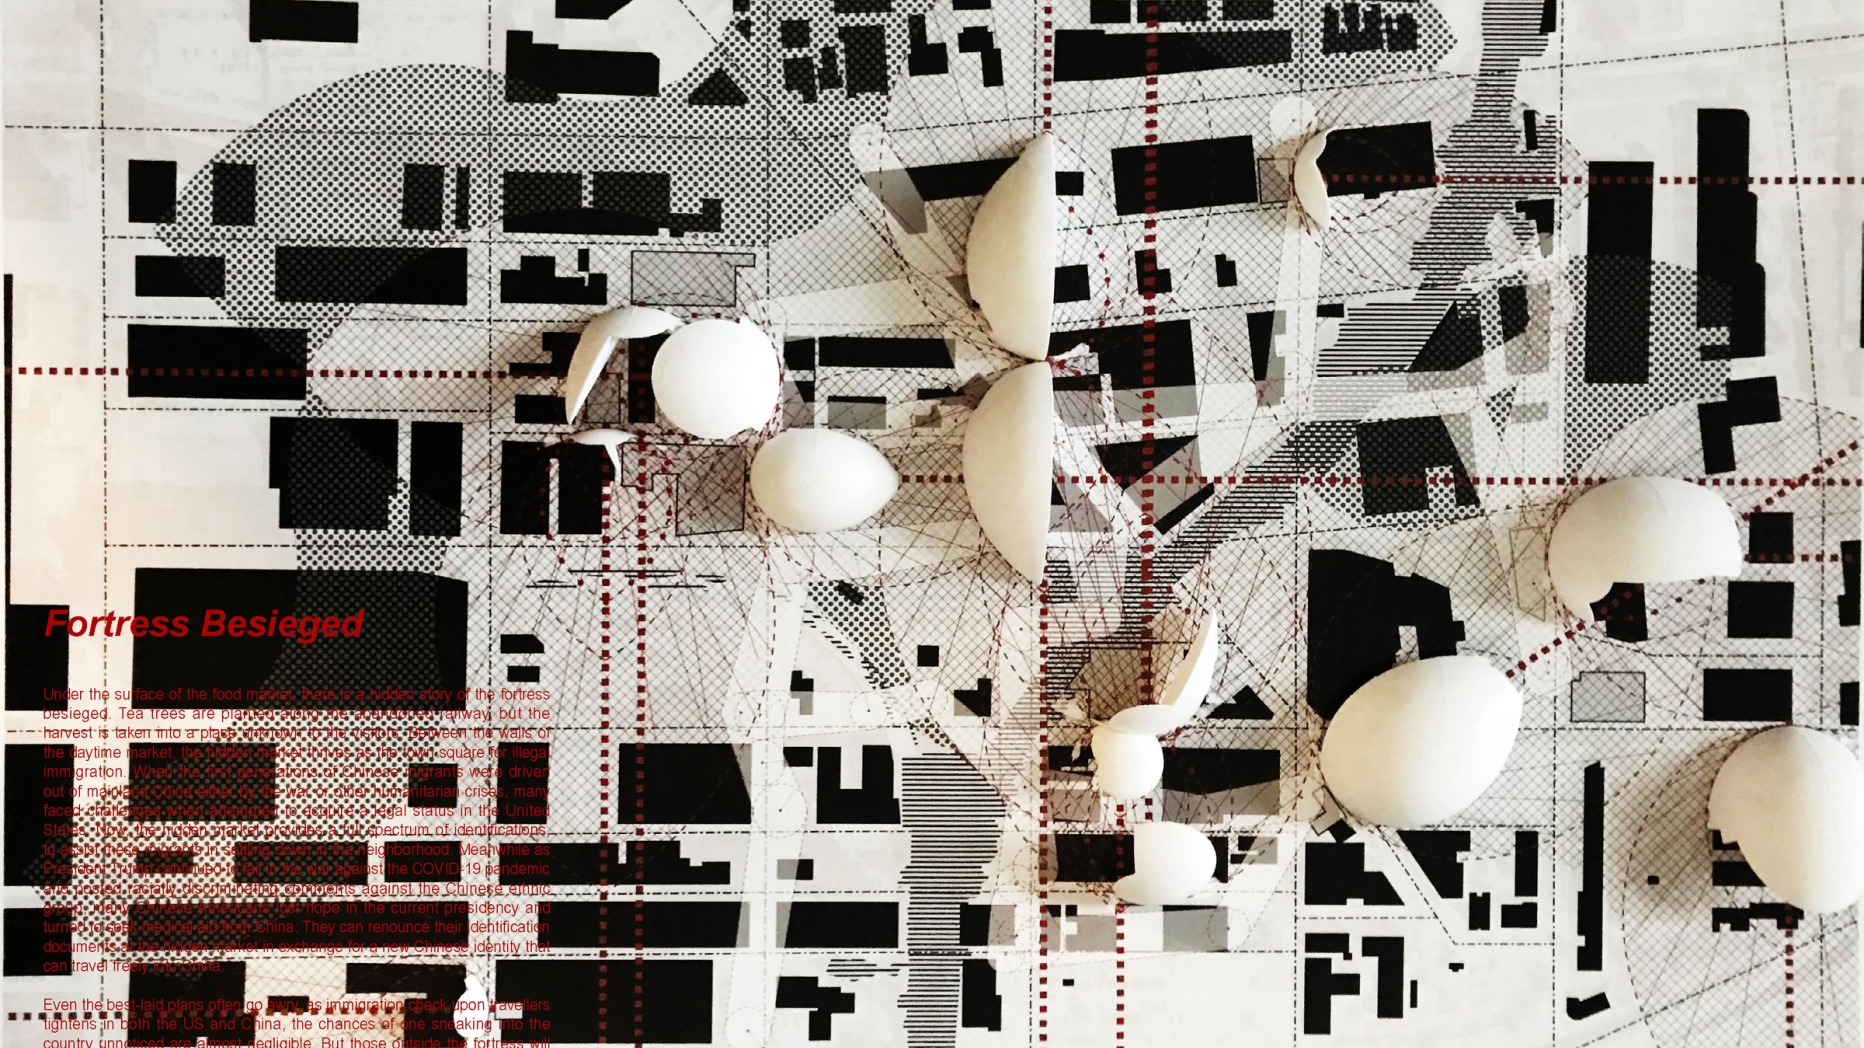 Map of area with many egg shape structure strewn about